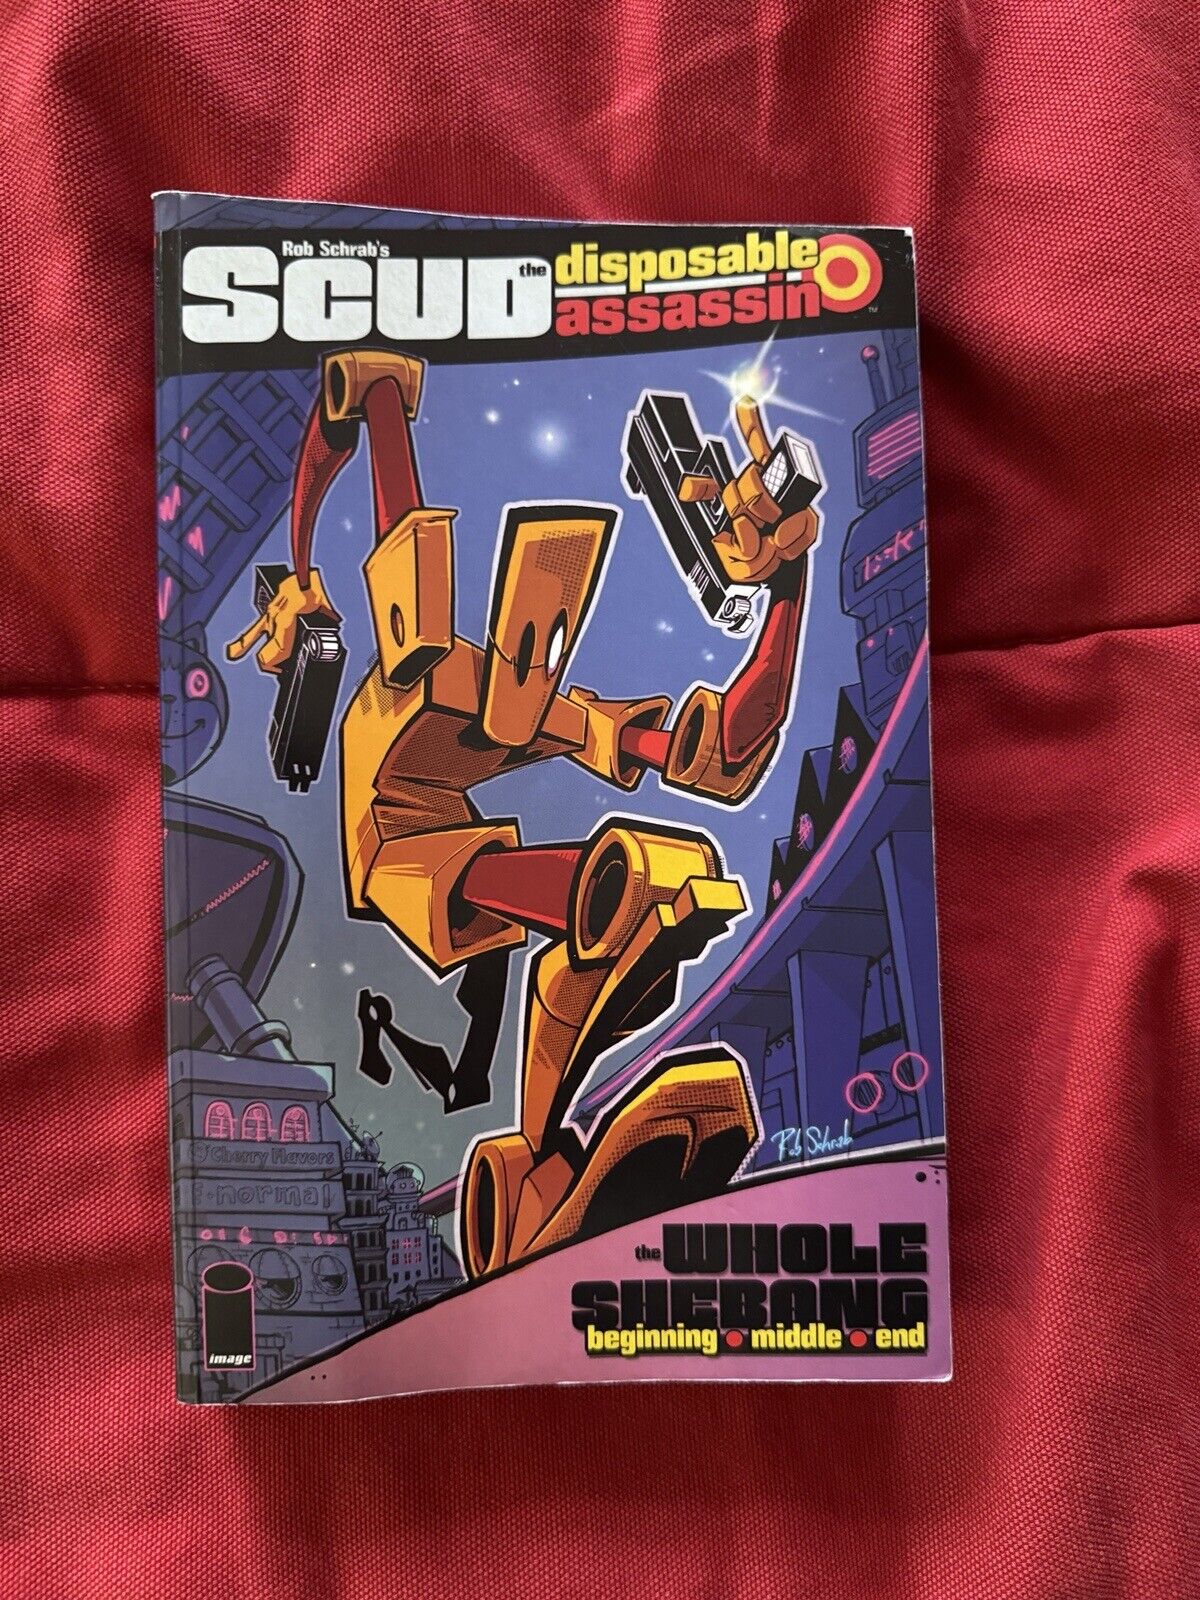 SCUD the Disposable Assassin: The Whole Shebang (5th Printing, 2018, Image)